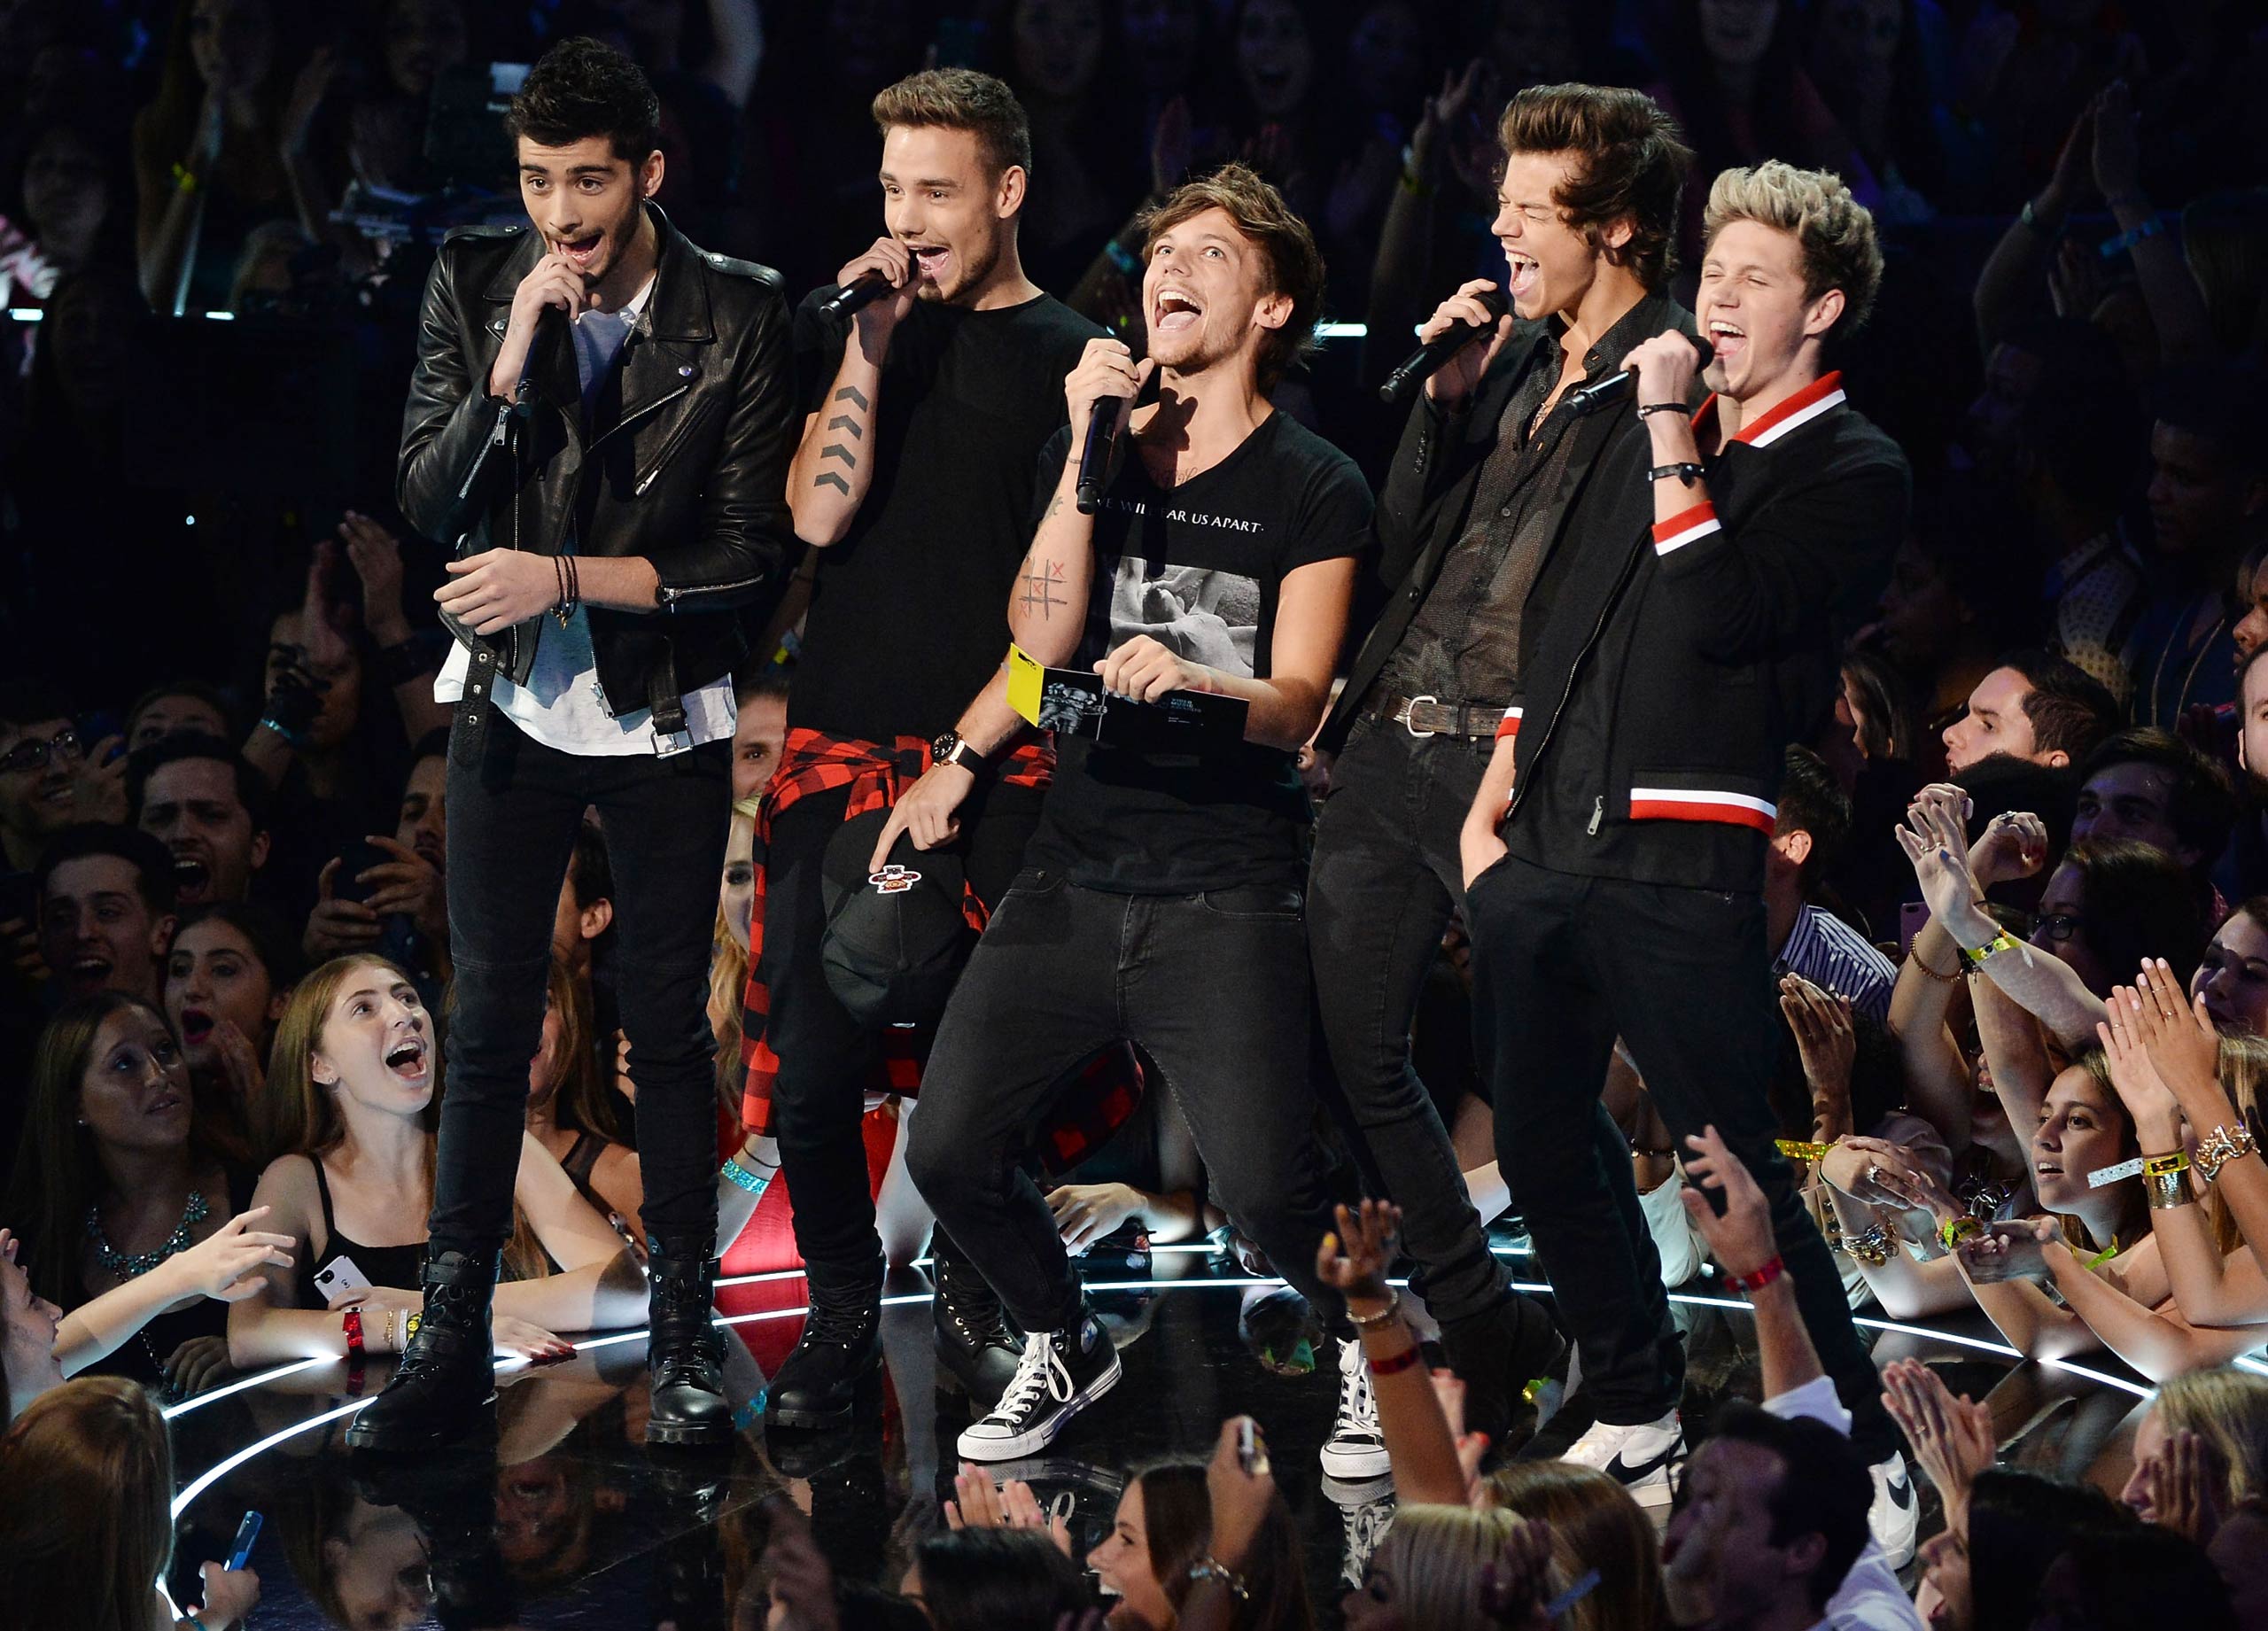 One Direction speaks onstage during the 2013 MTV Video Music Awards at the Barclays Center in Brooklyn in 2013.